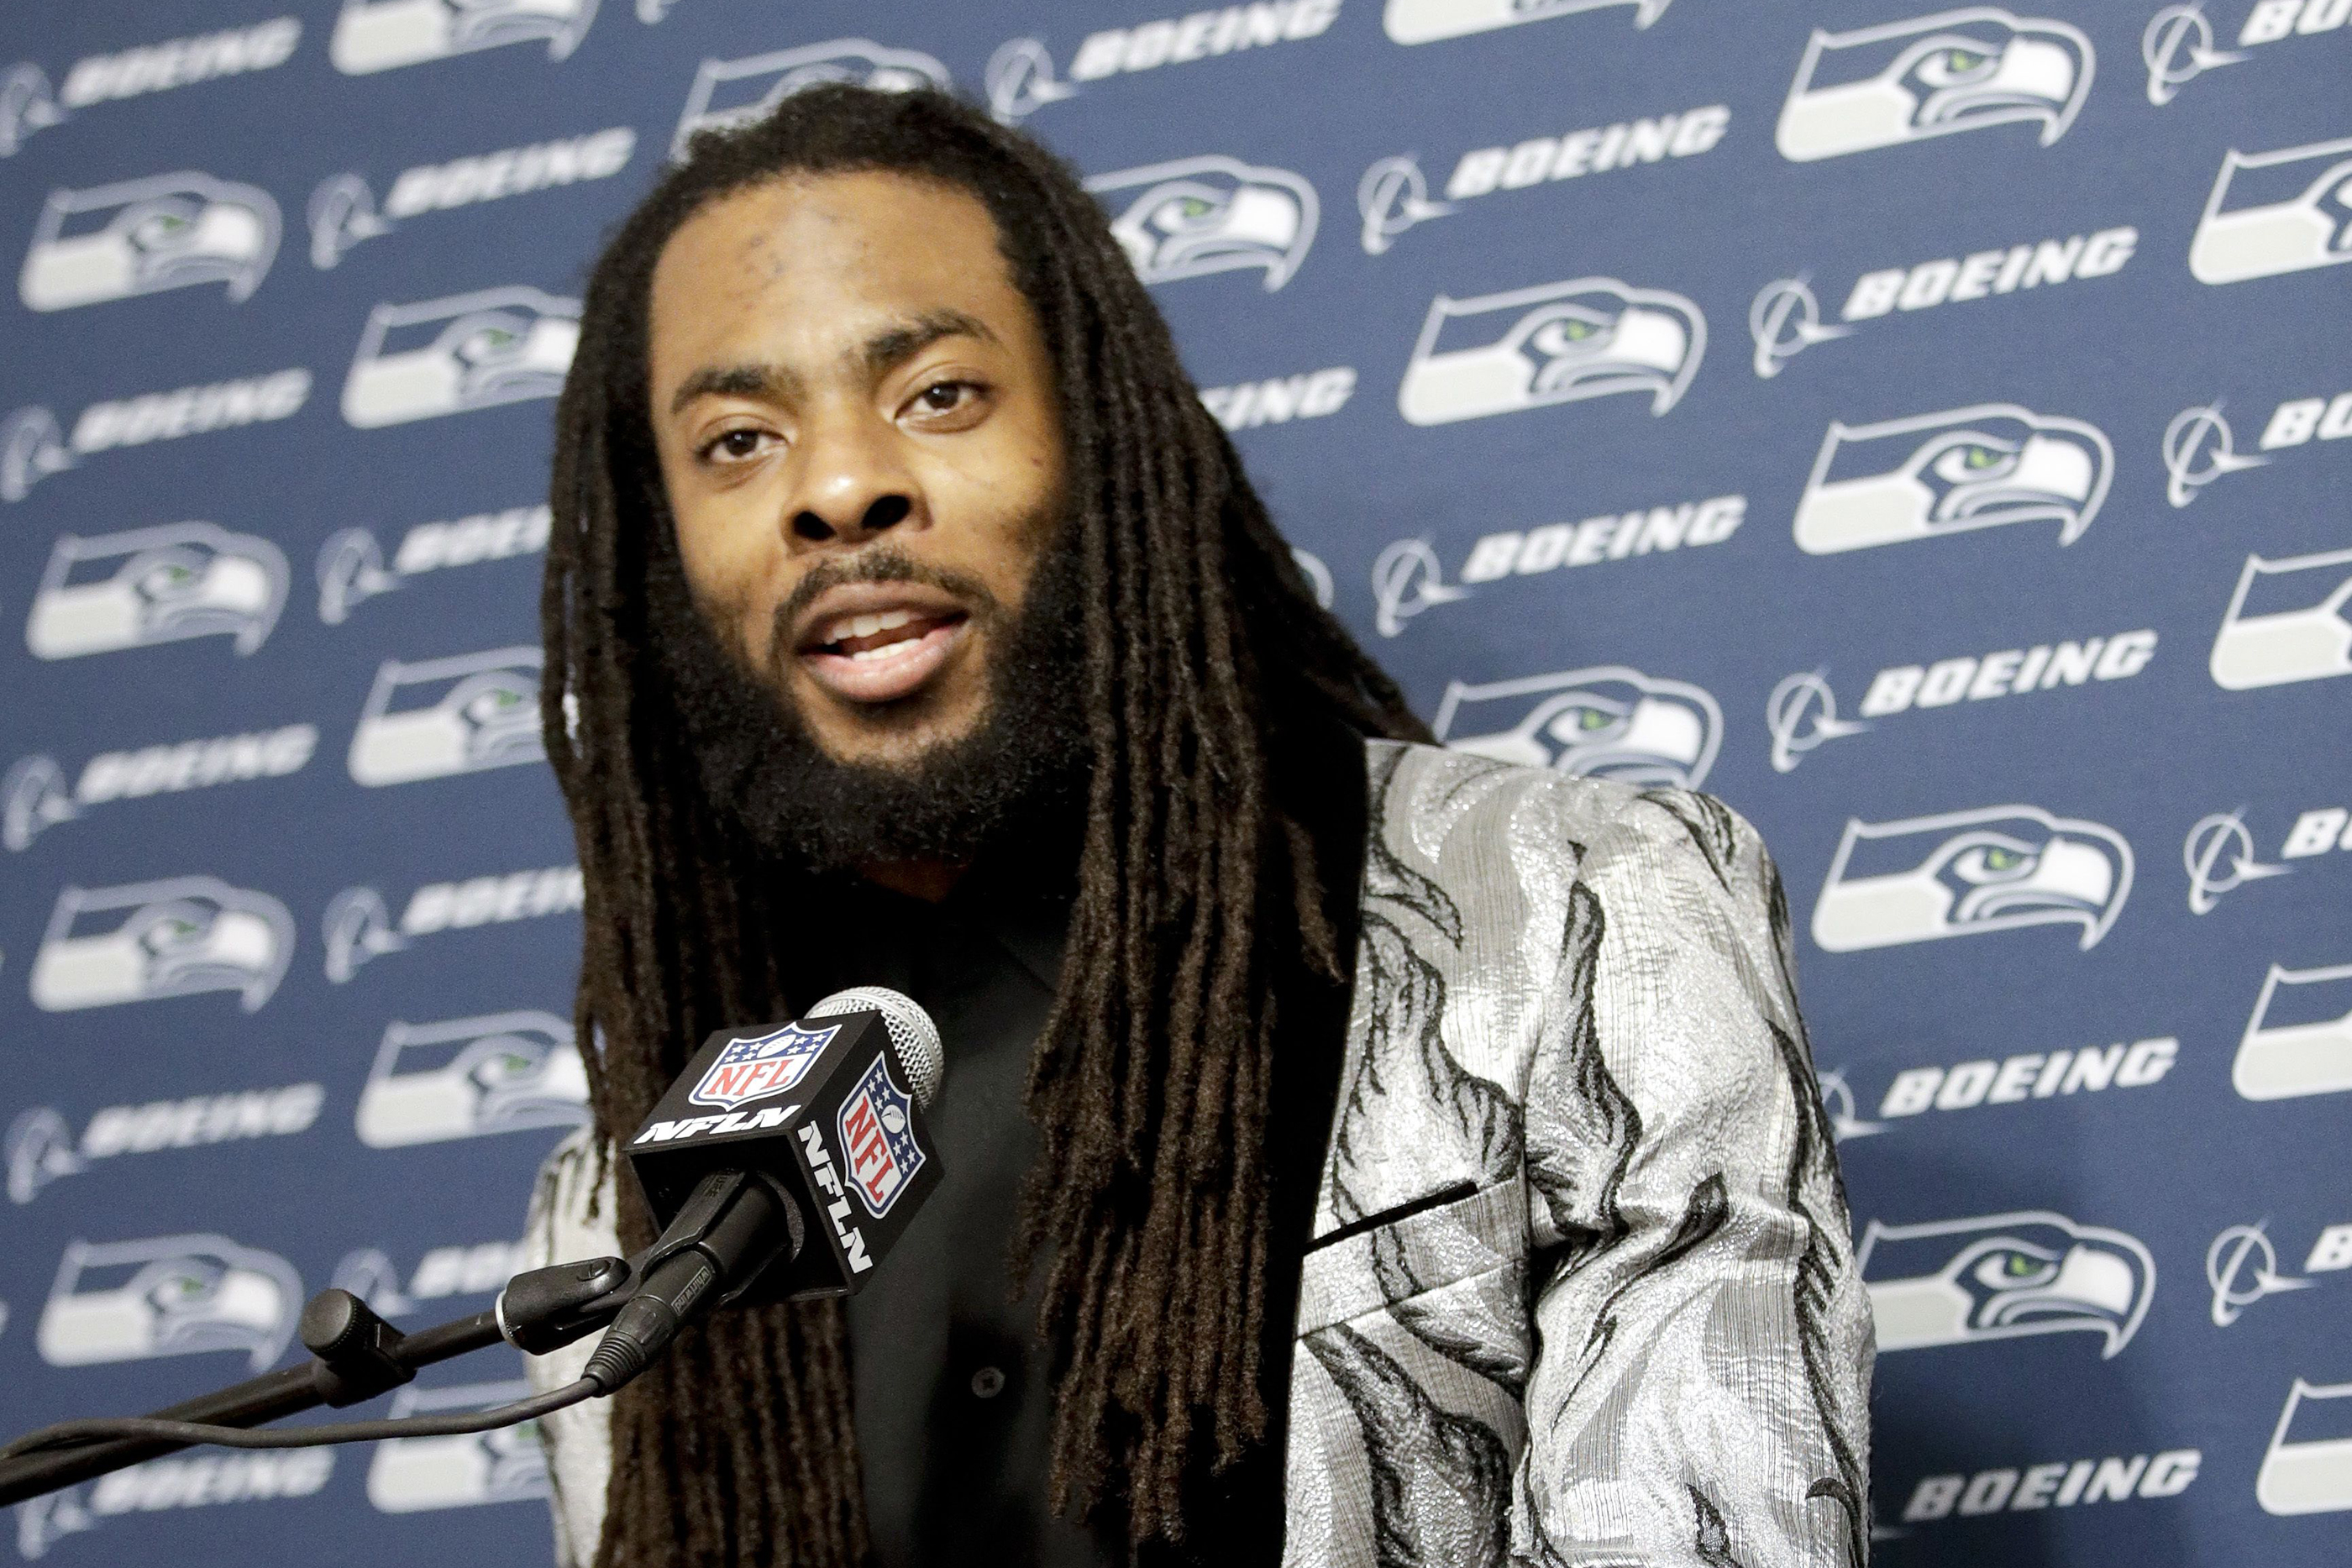 The 1 Book You Should Read About Money, According to NFL Star and Entrepreneur Richard Sherman